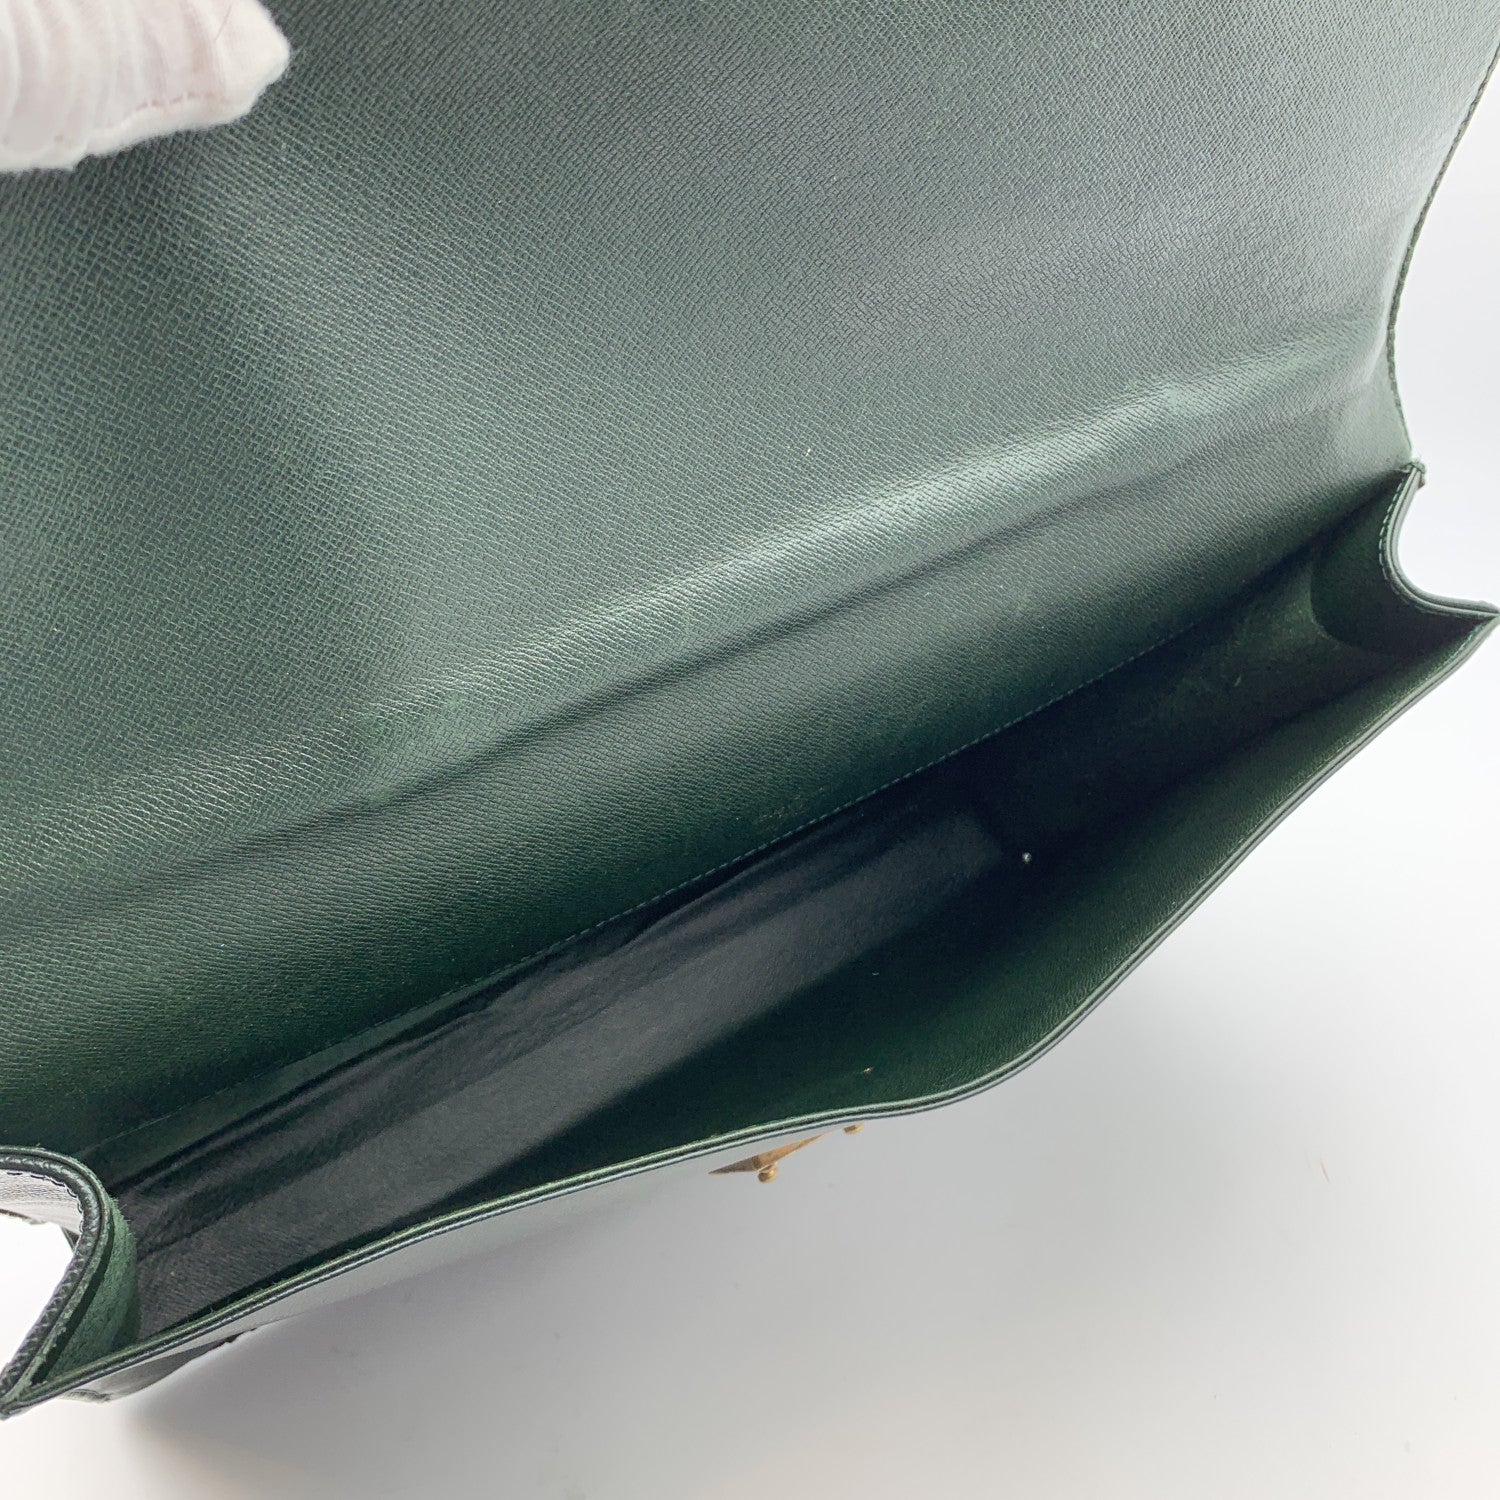 TOP Robusto Briefcase Taiga Leather In Green Black Tote Bag Woman Fashion  Classic Handbag Cowhide Leather Trim Signature Pin Lo265v From Uwmgut,  $256.4